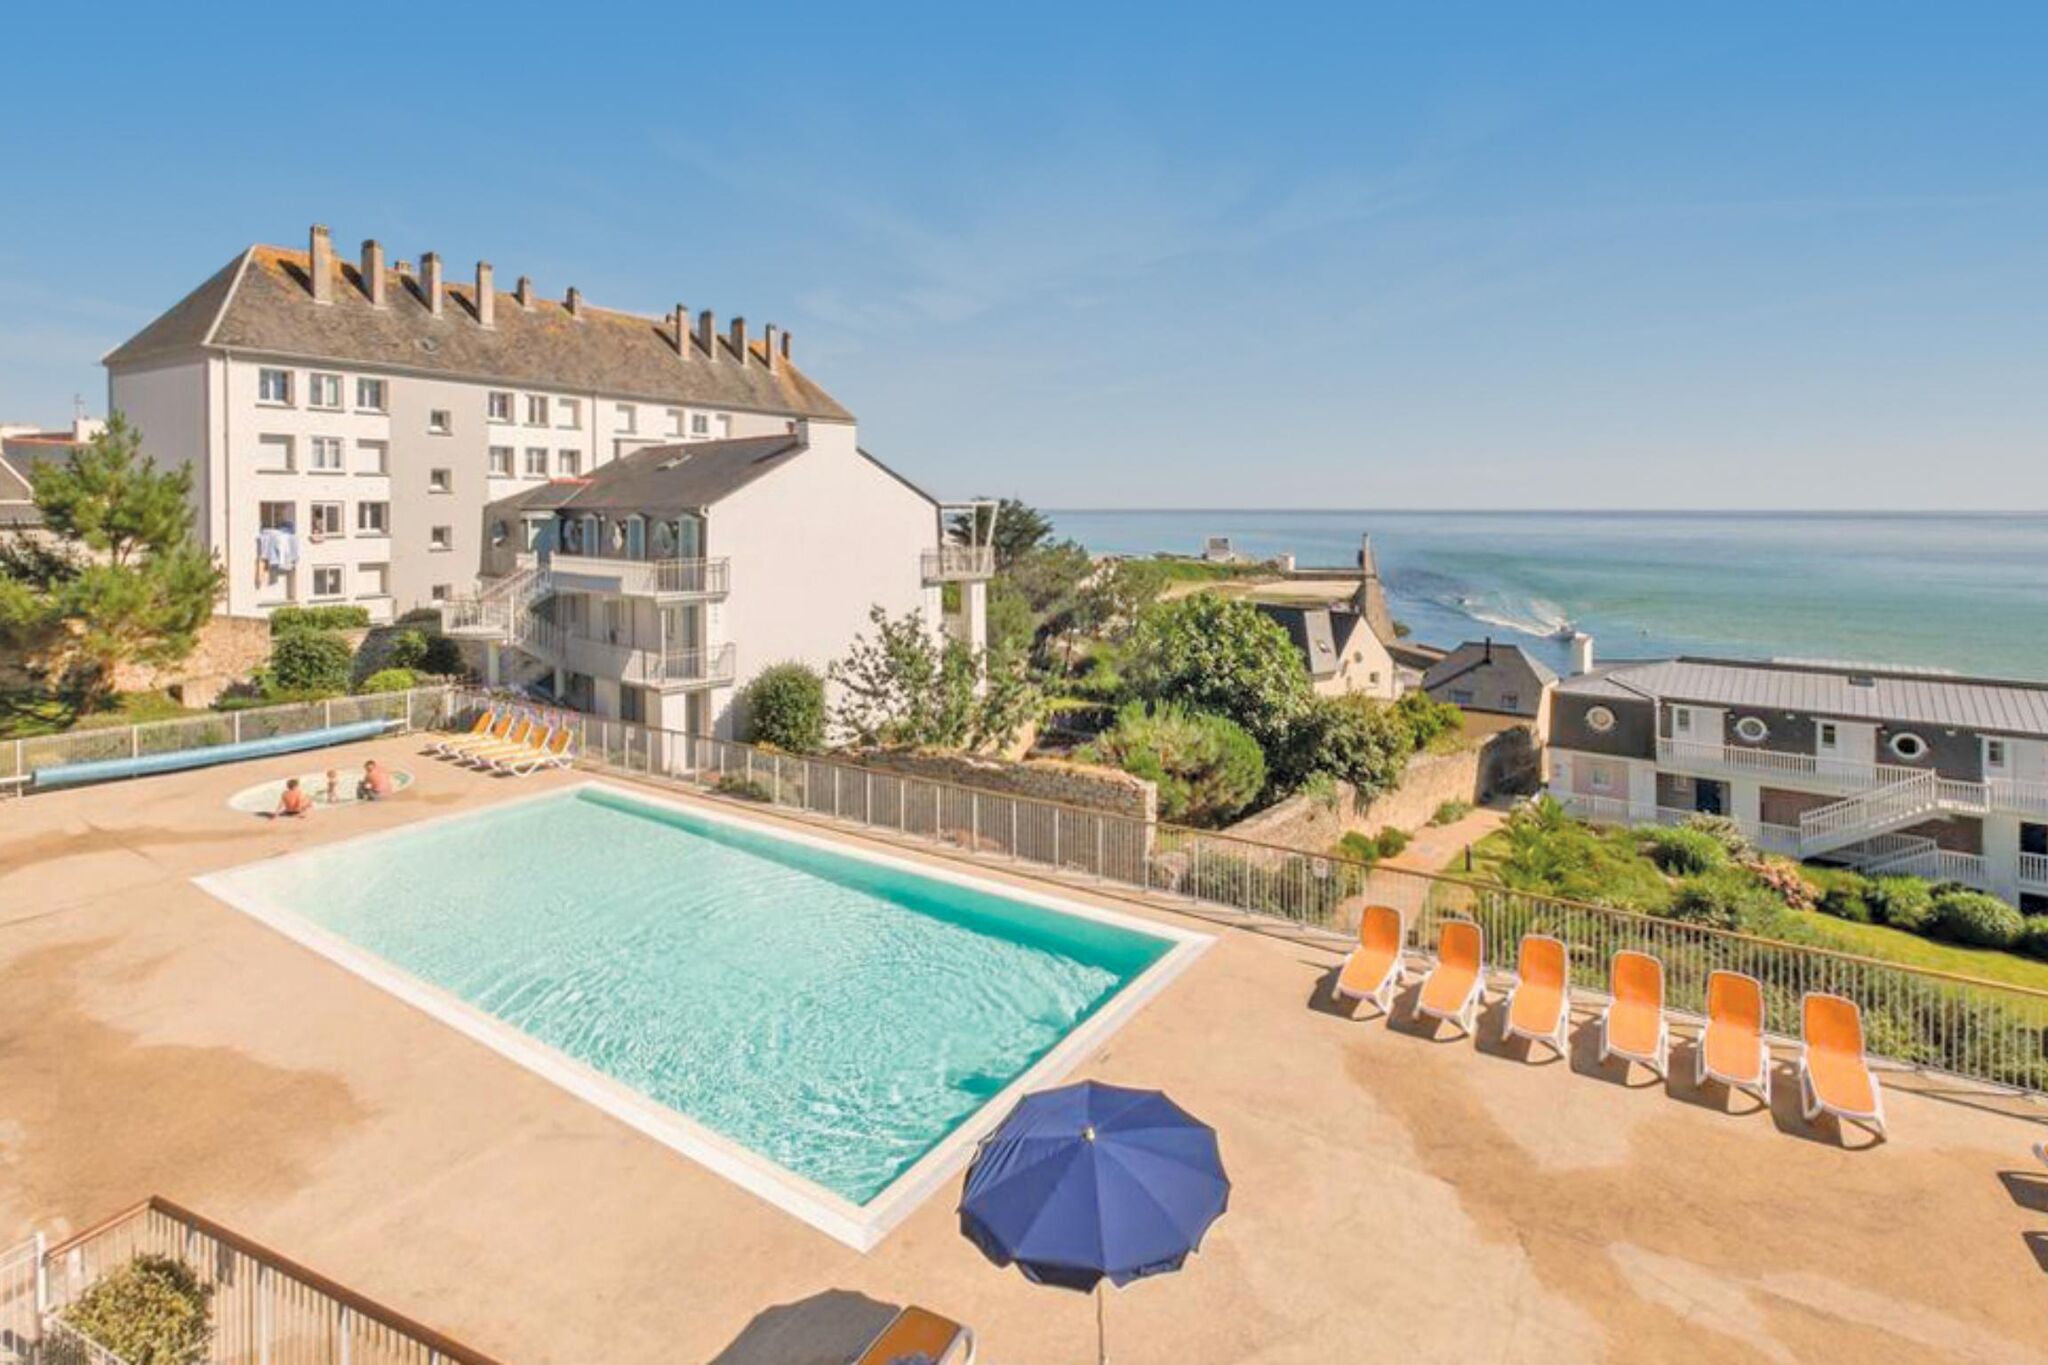 Apartment with pool and sea view in southwest Brittany